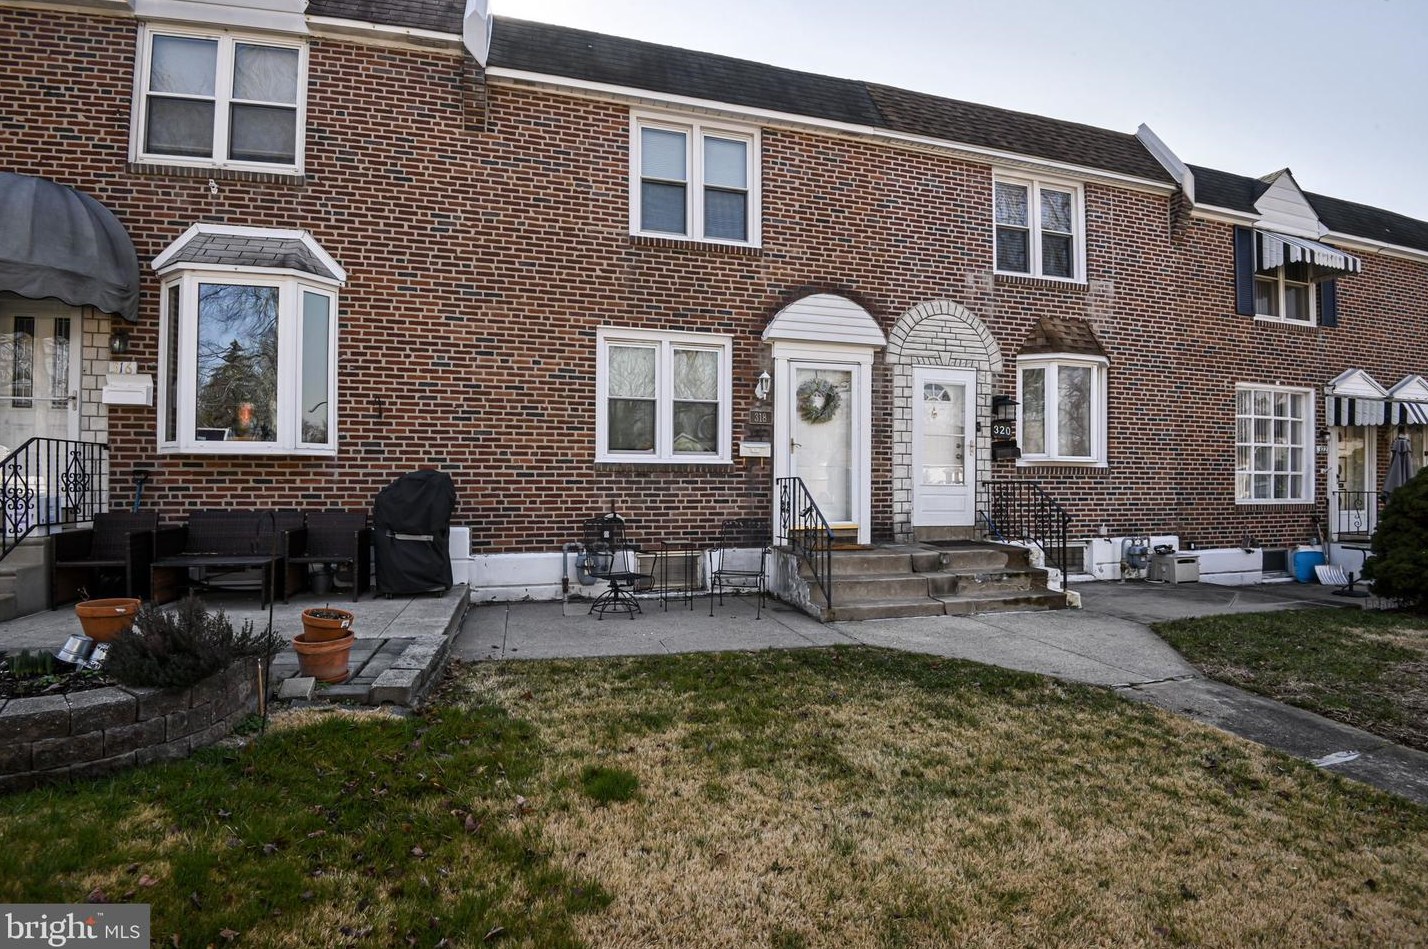 318 Rively Ave, Manor, PA 19036-1013